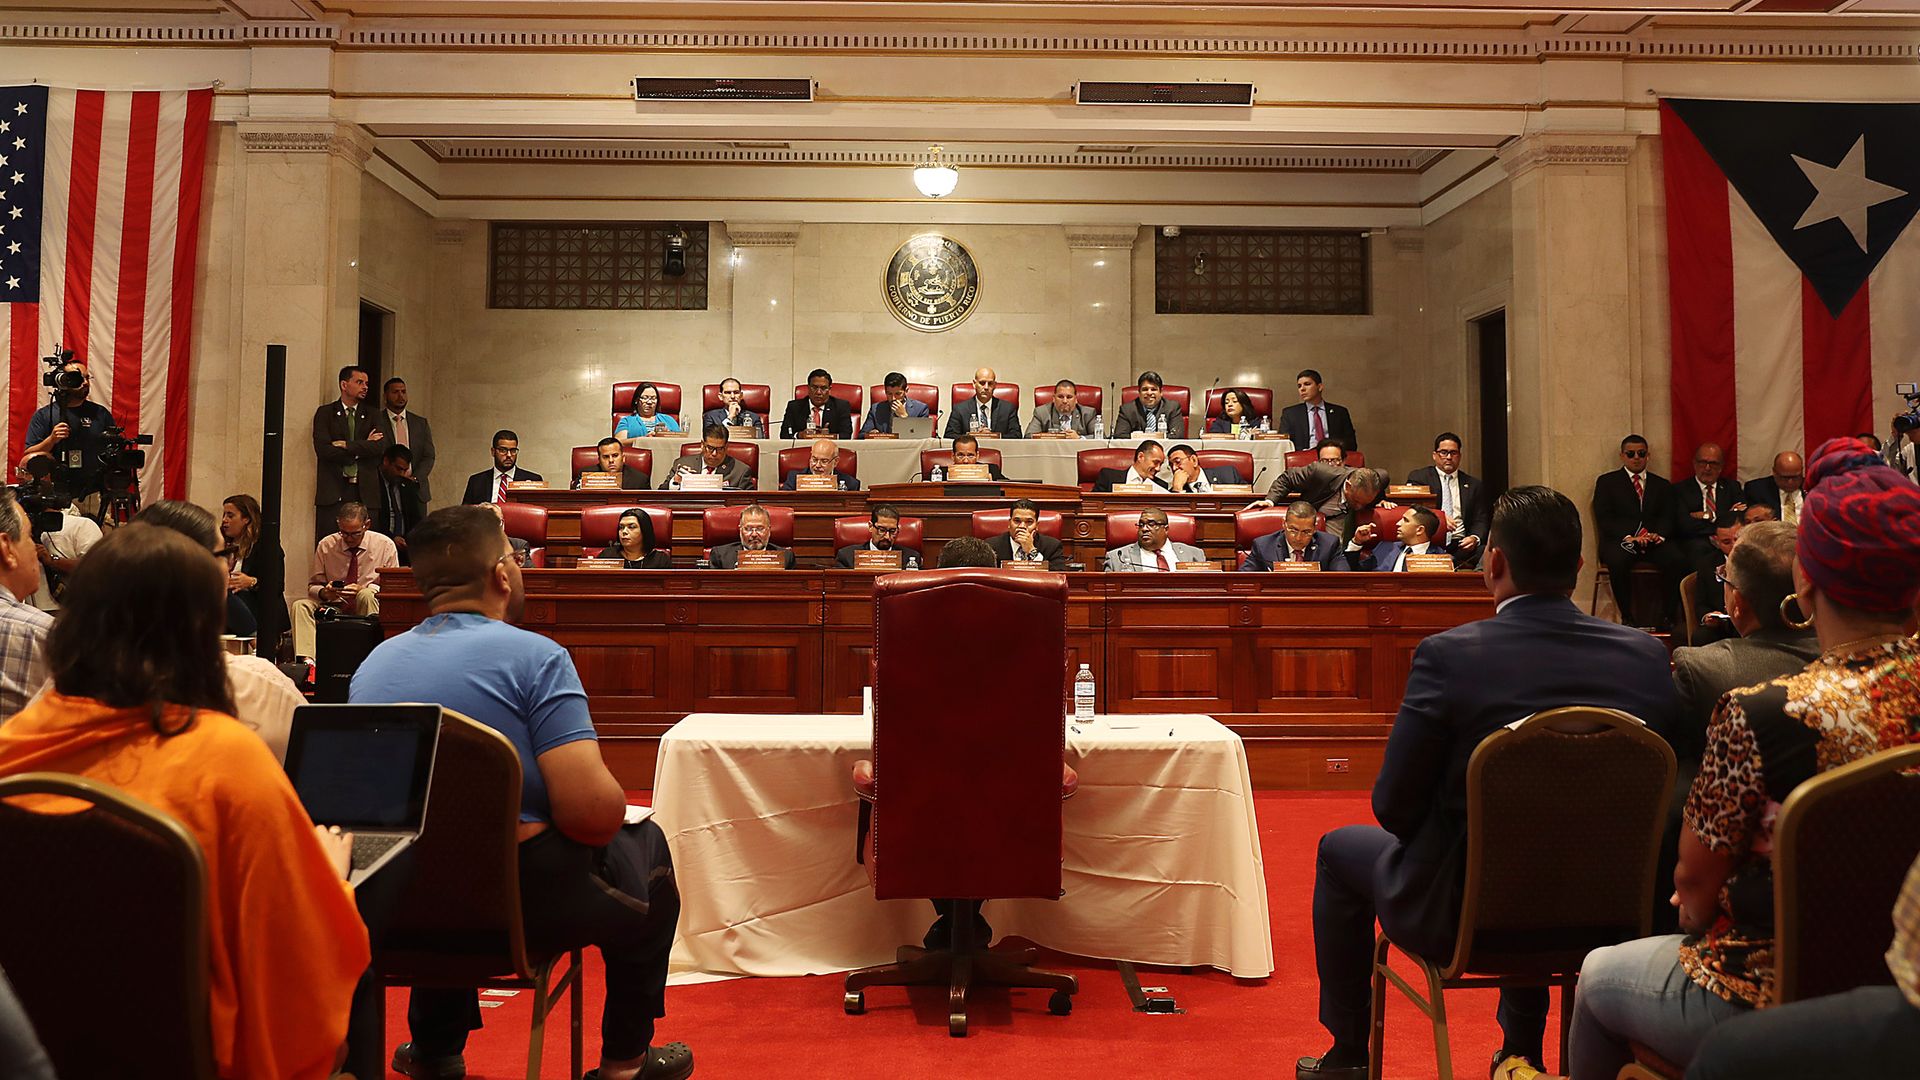 This image shows the inside of the Puerto Rican House of Representatives during a hearing